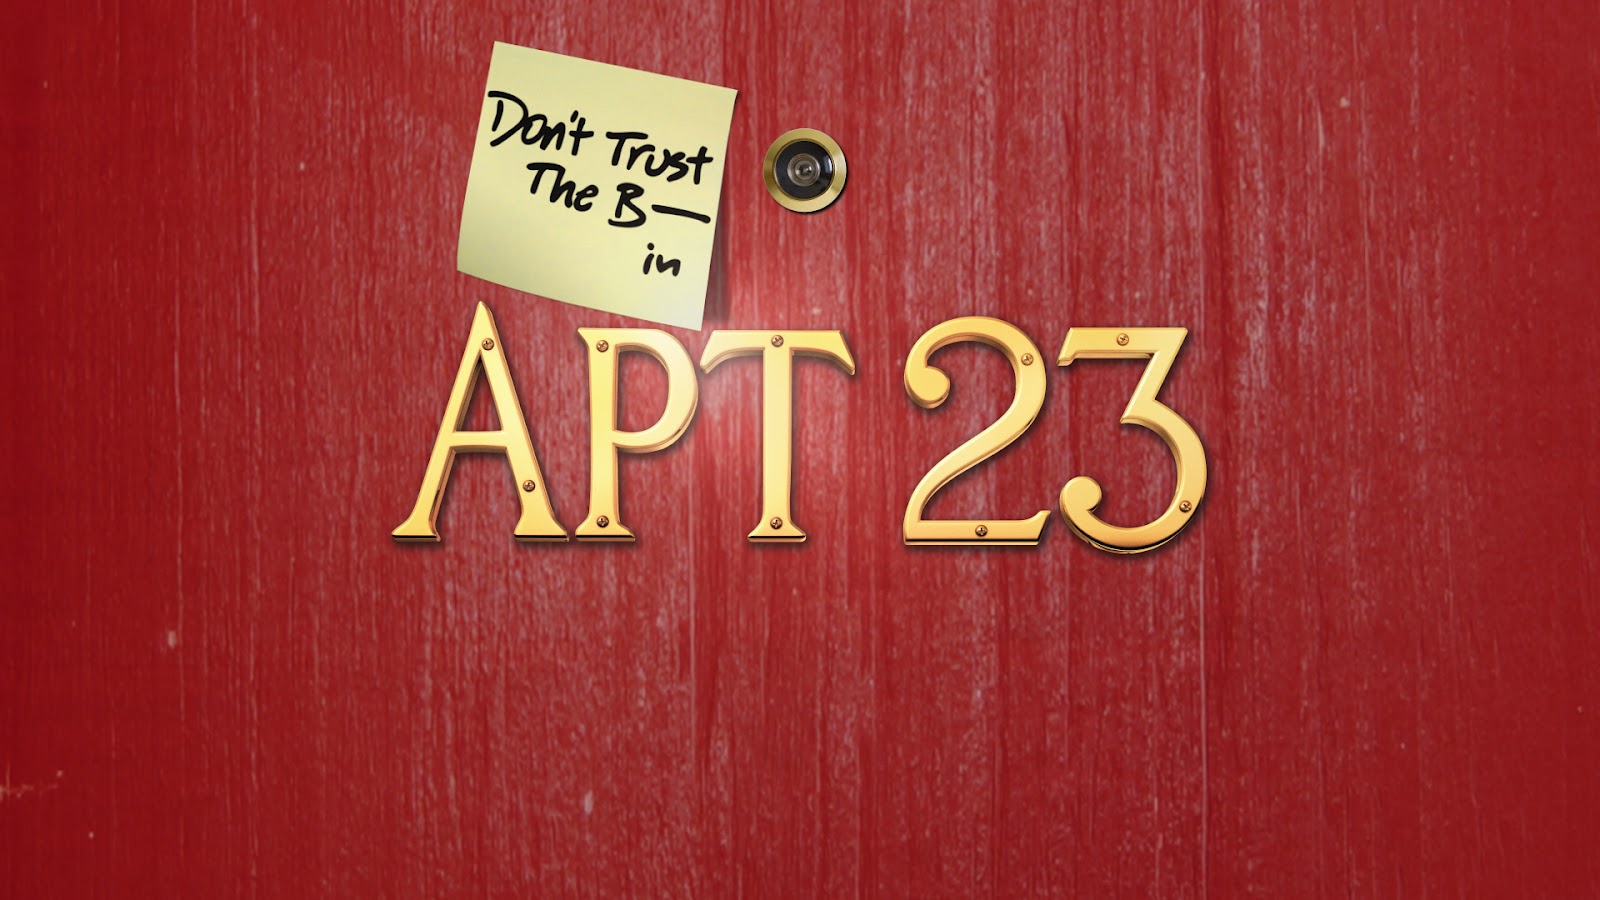 Dont only. "Don't Trust the b in Apt 23".